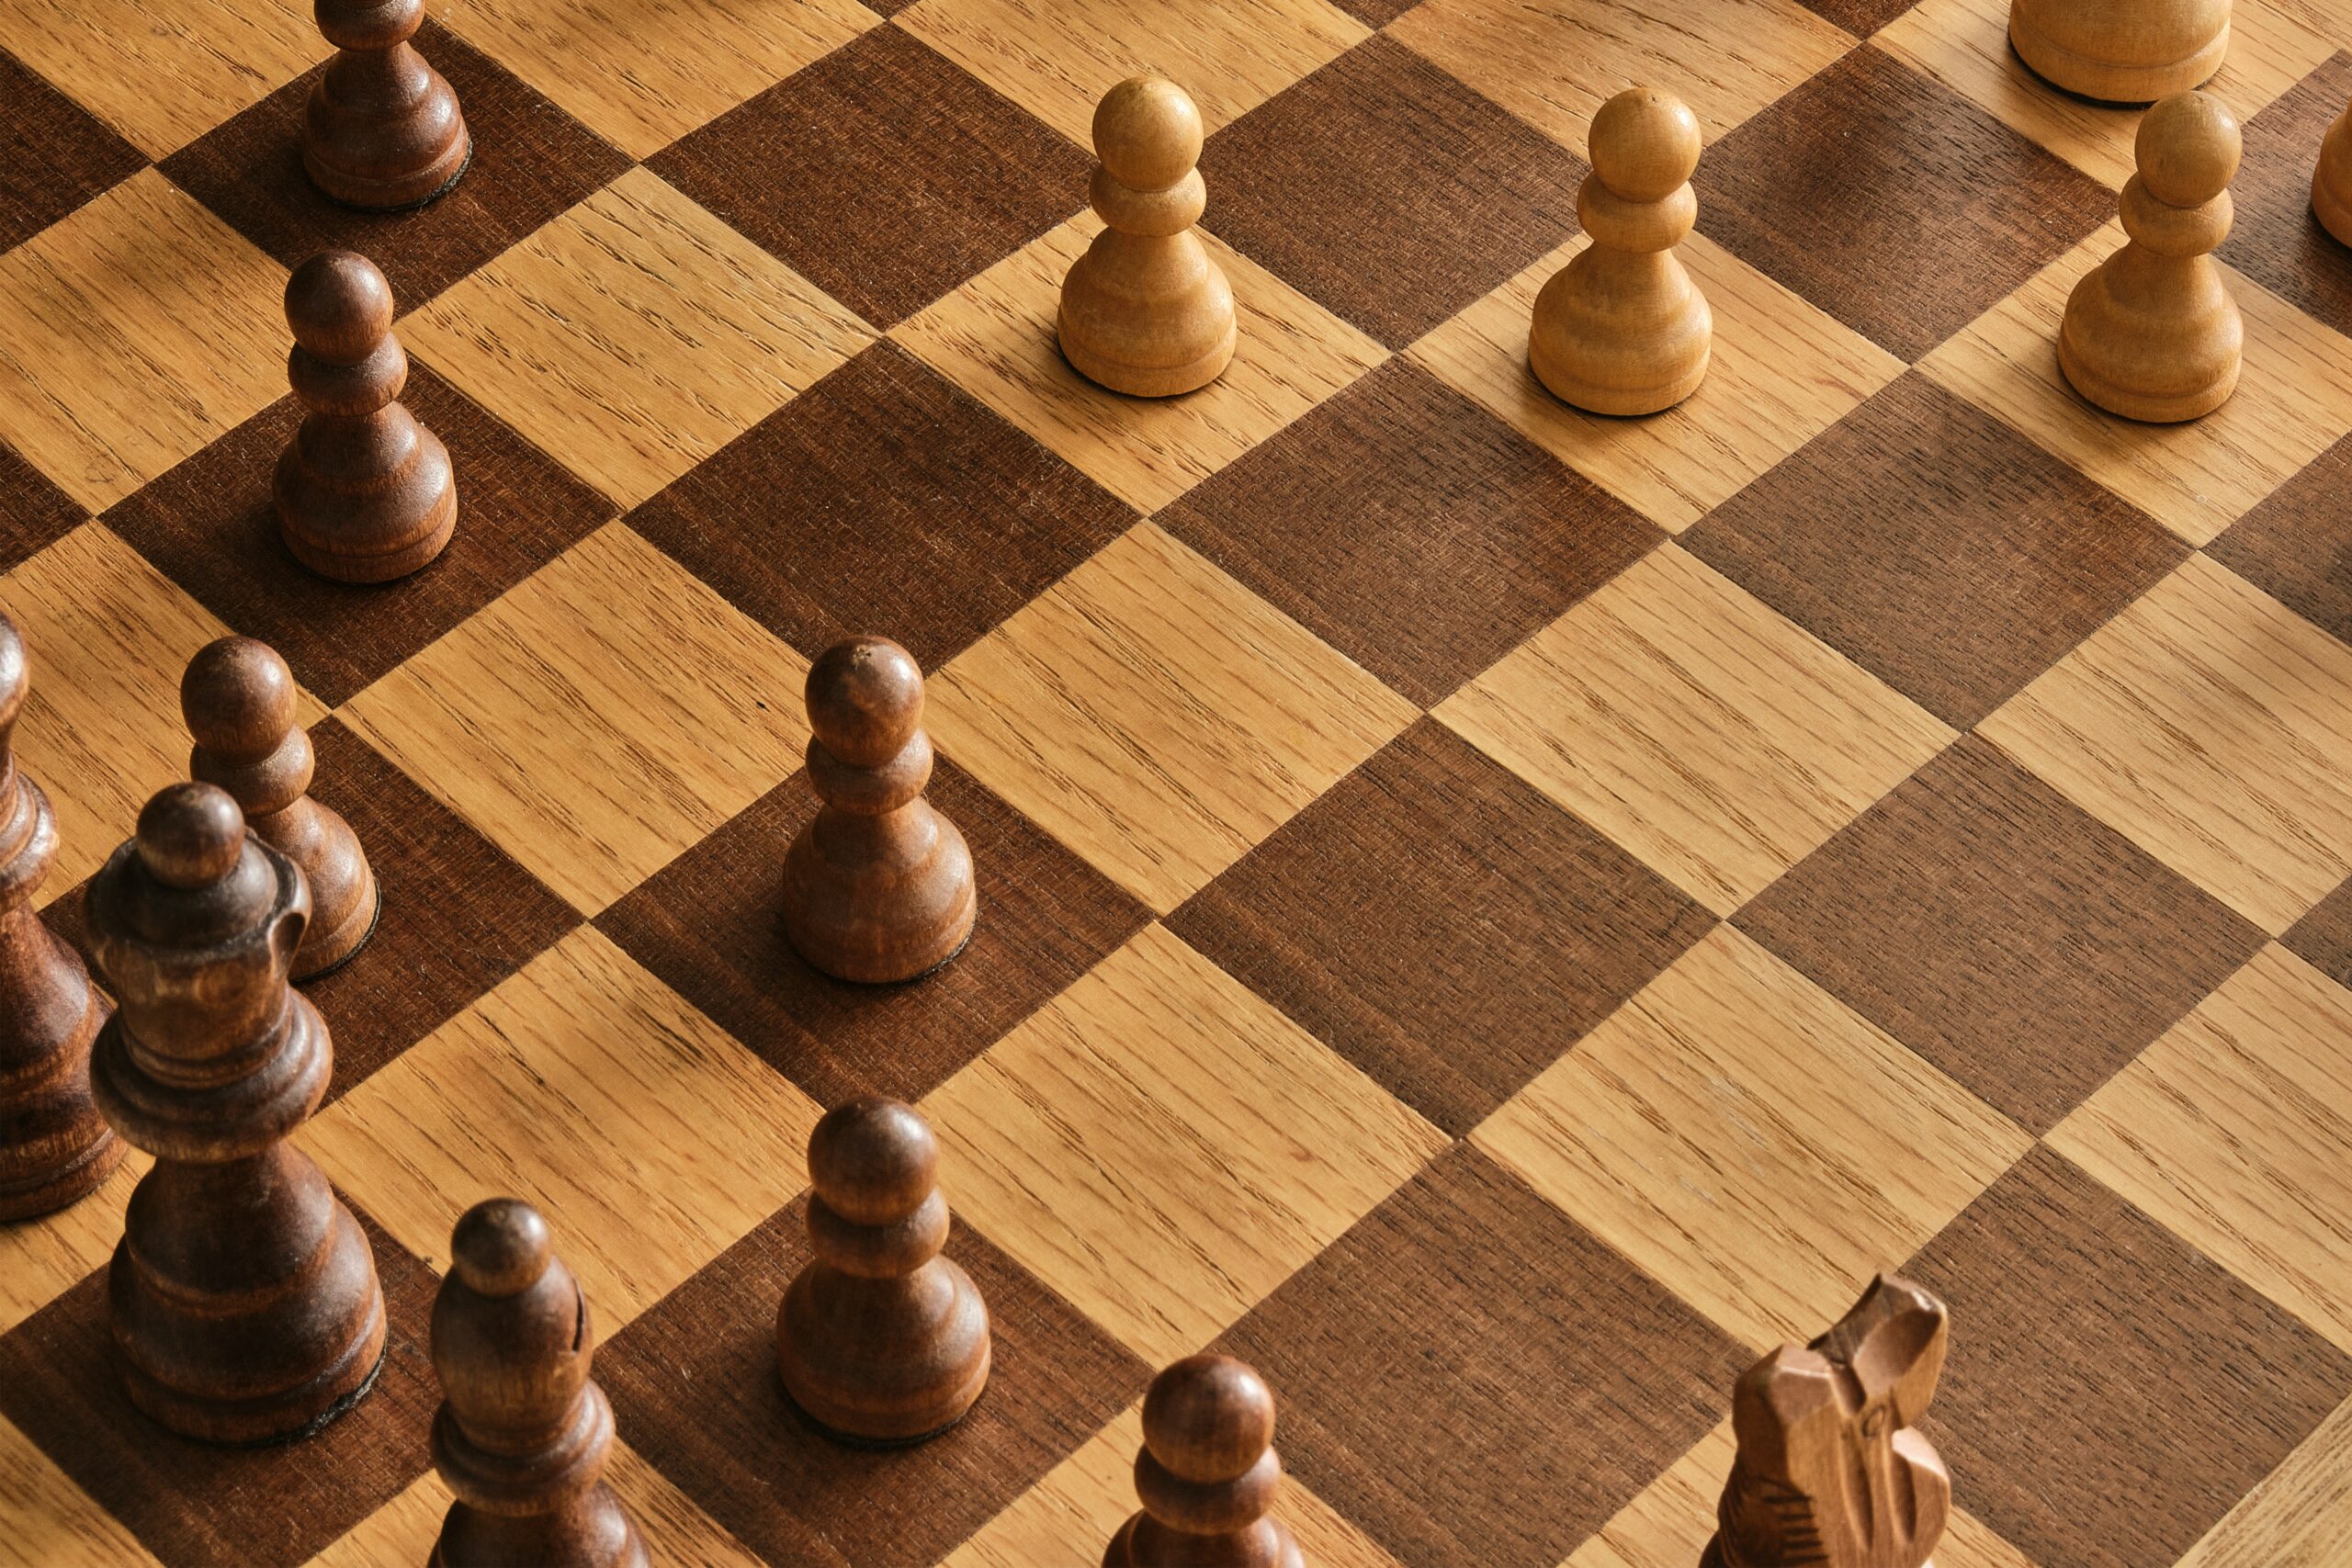 materials are chess boards made of